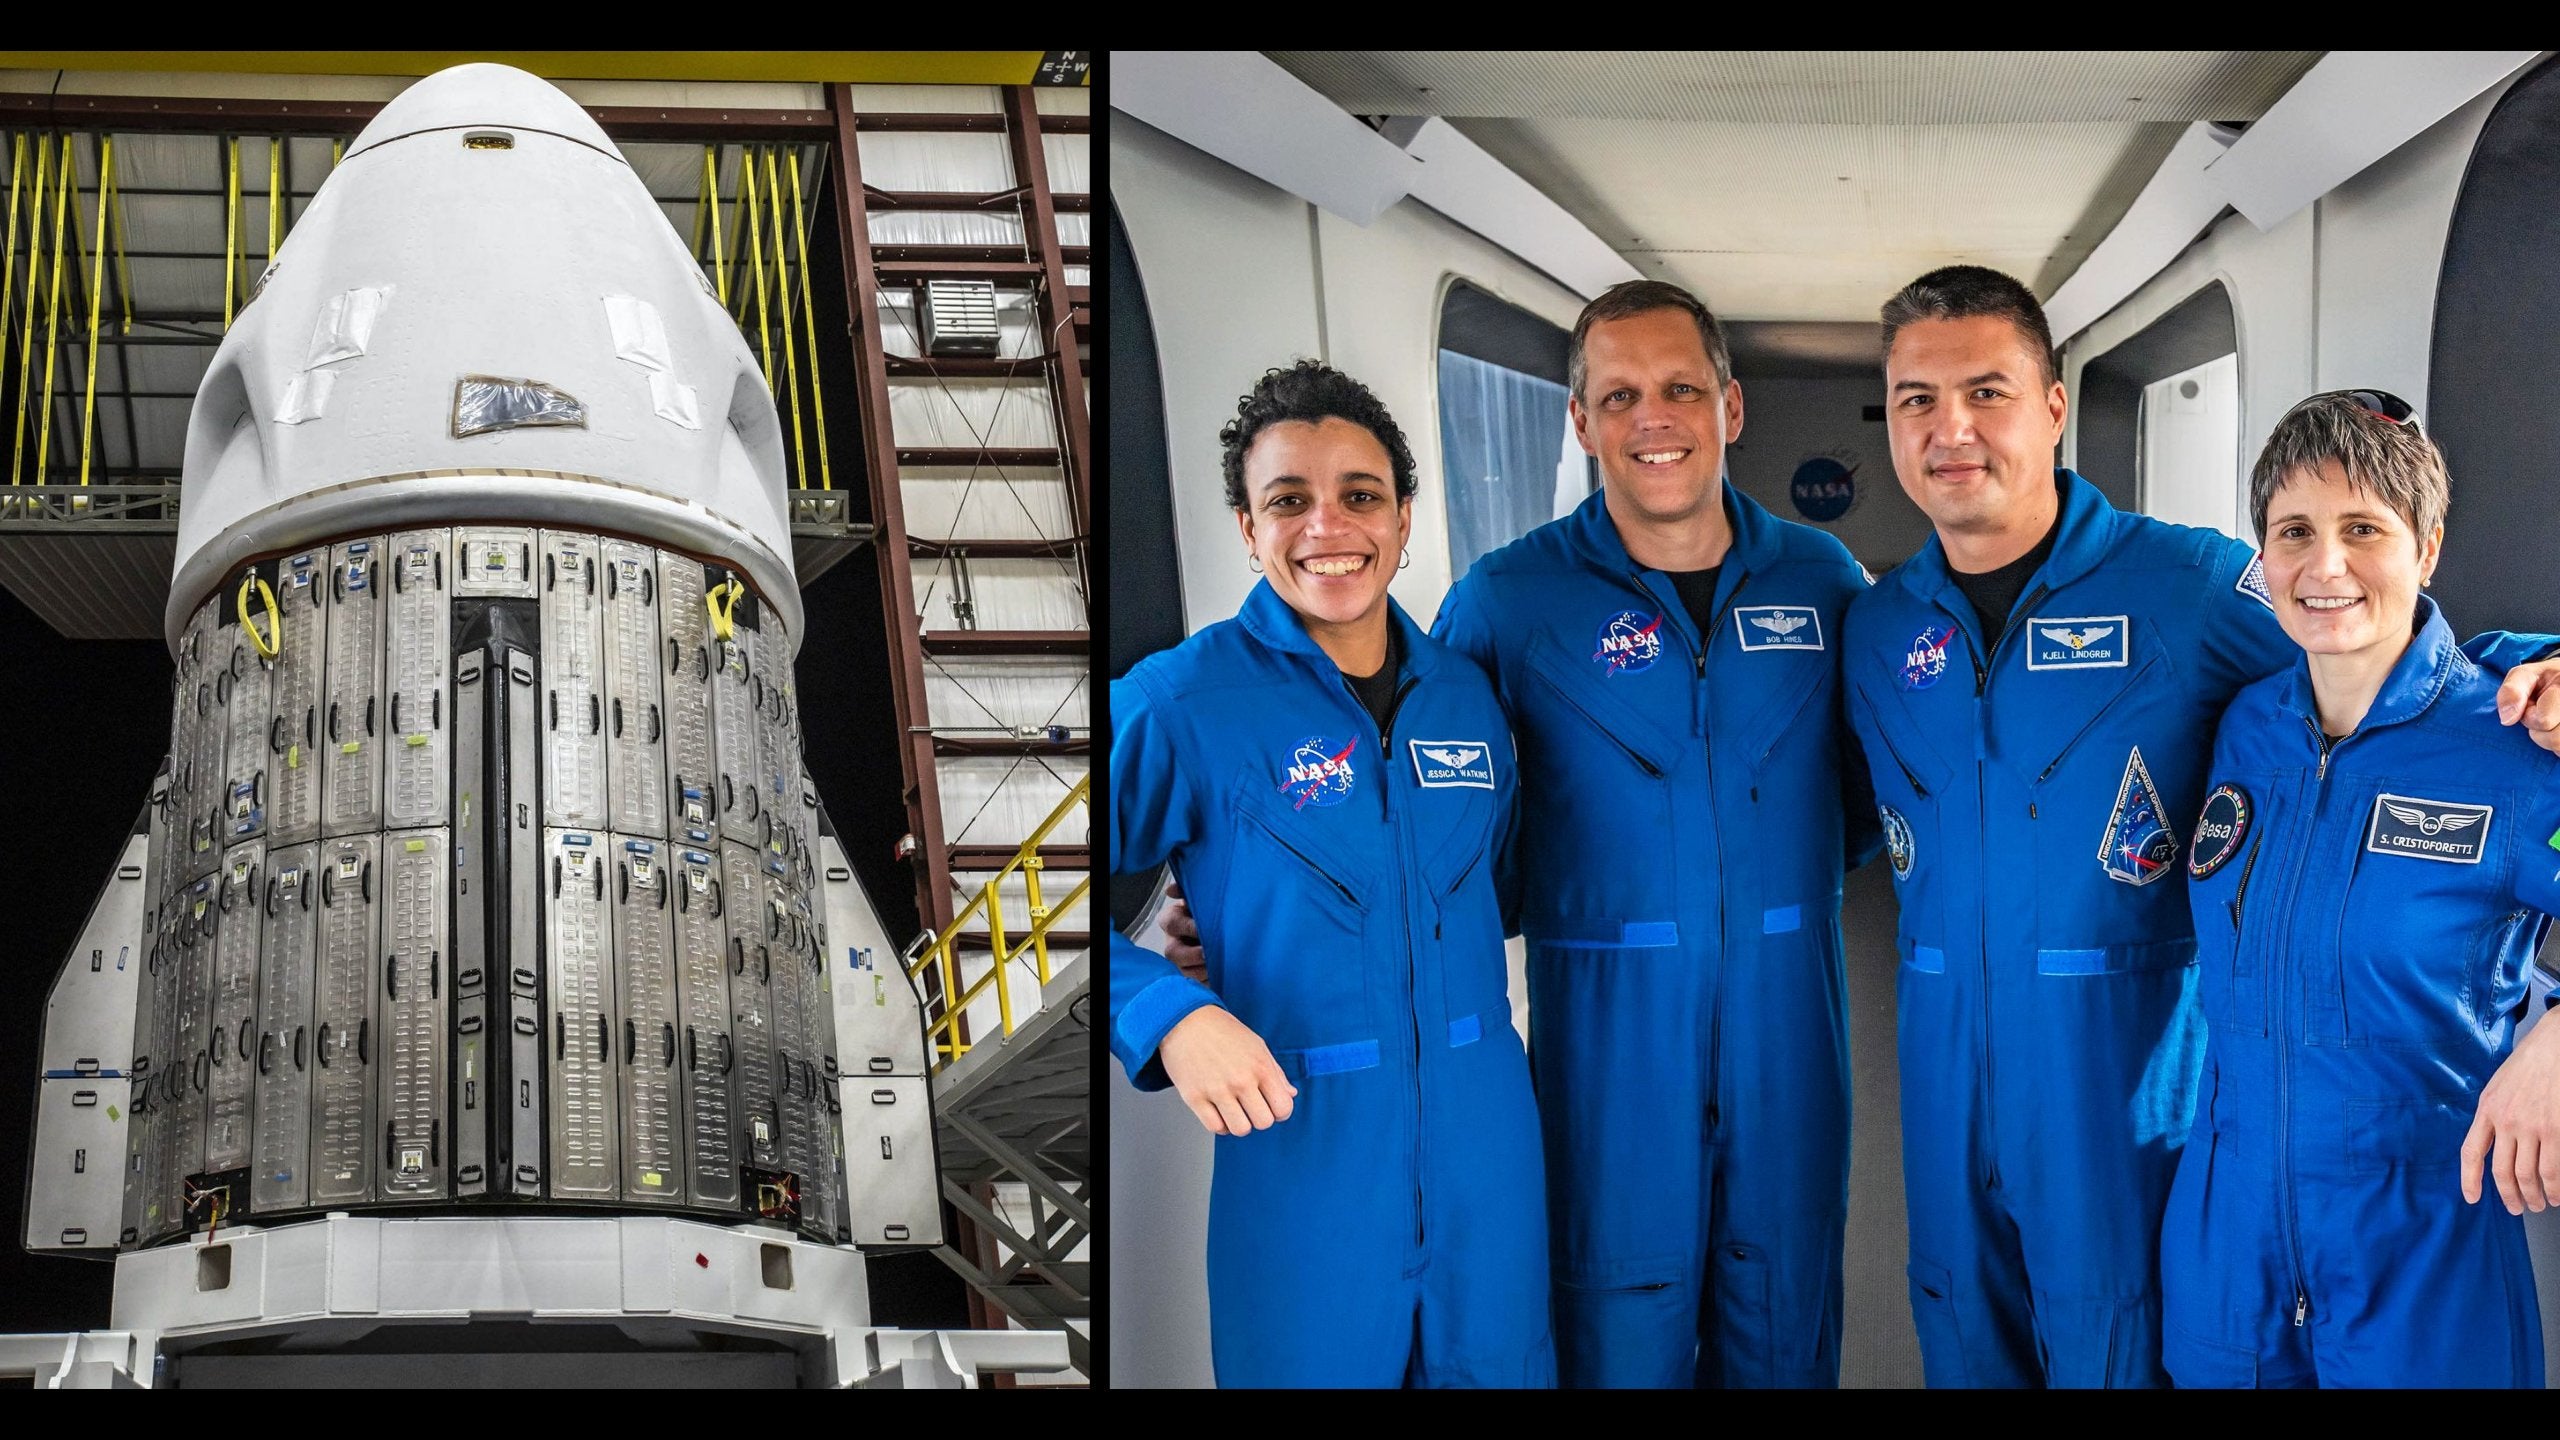 Brand-new SpaceX Crew Dragon 'Freedom' spacecraft arrives to NASA Kennedy Space Center to launch Crew-4 astronauts